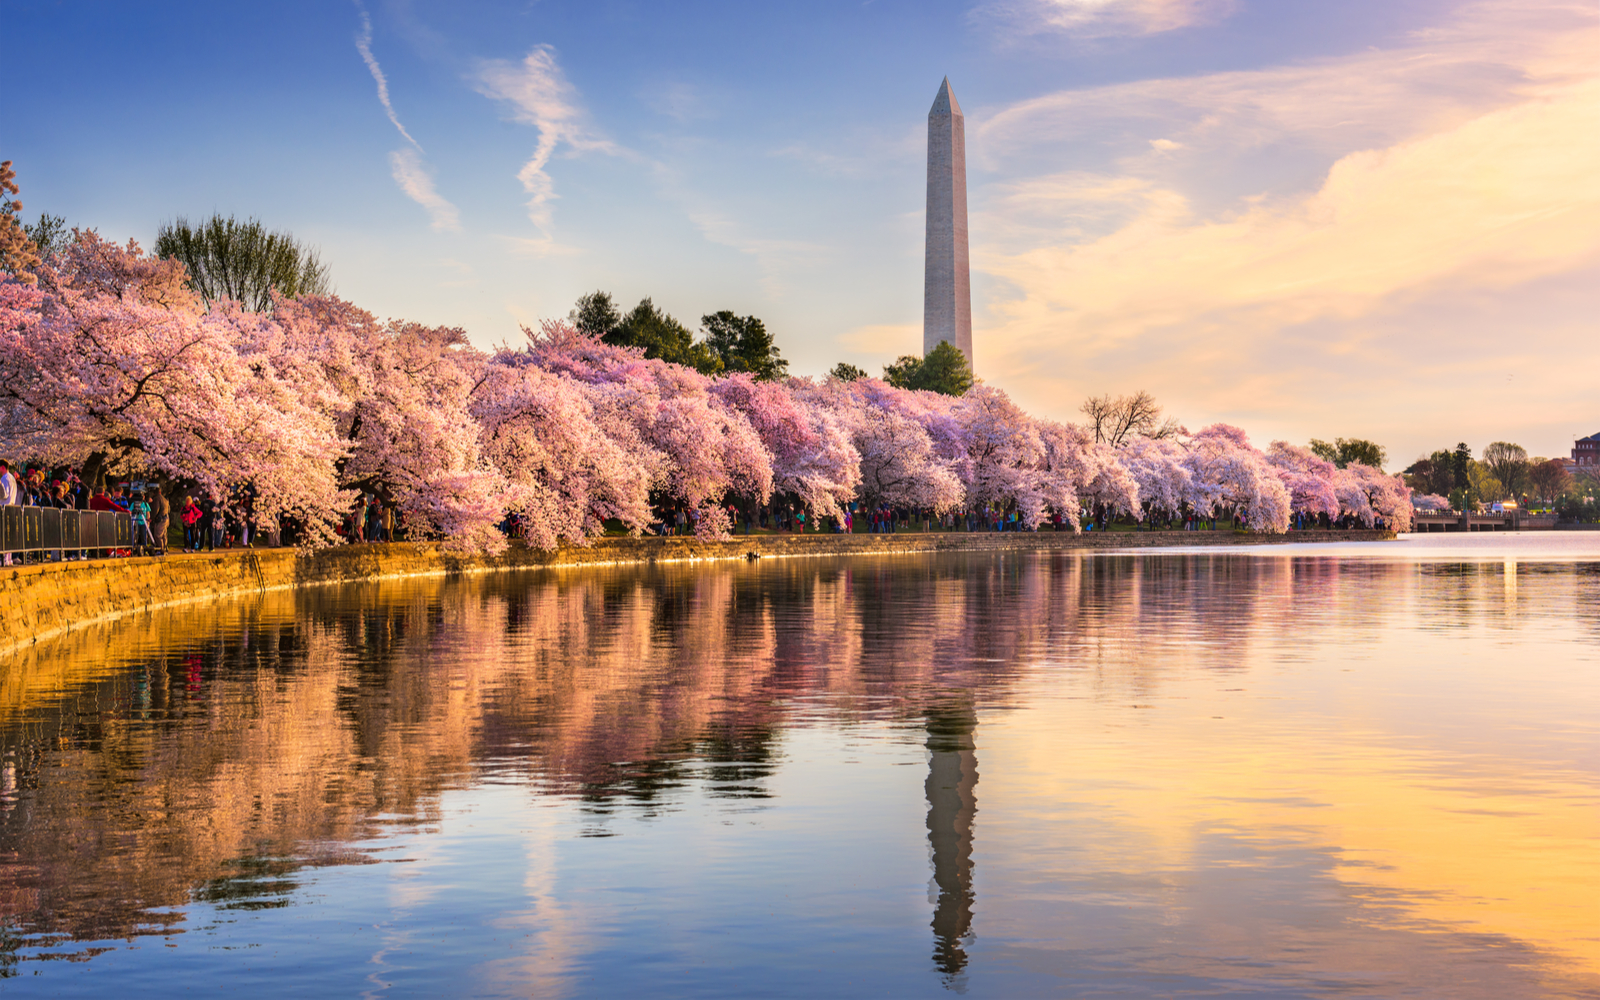 The Best Time to Visit Washington, D.C. in 2023